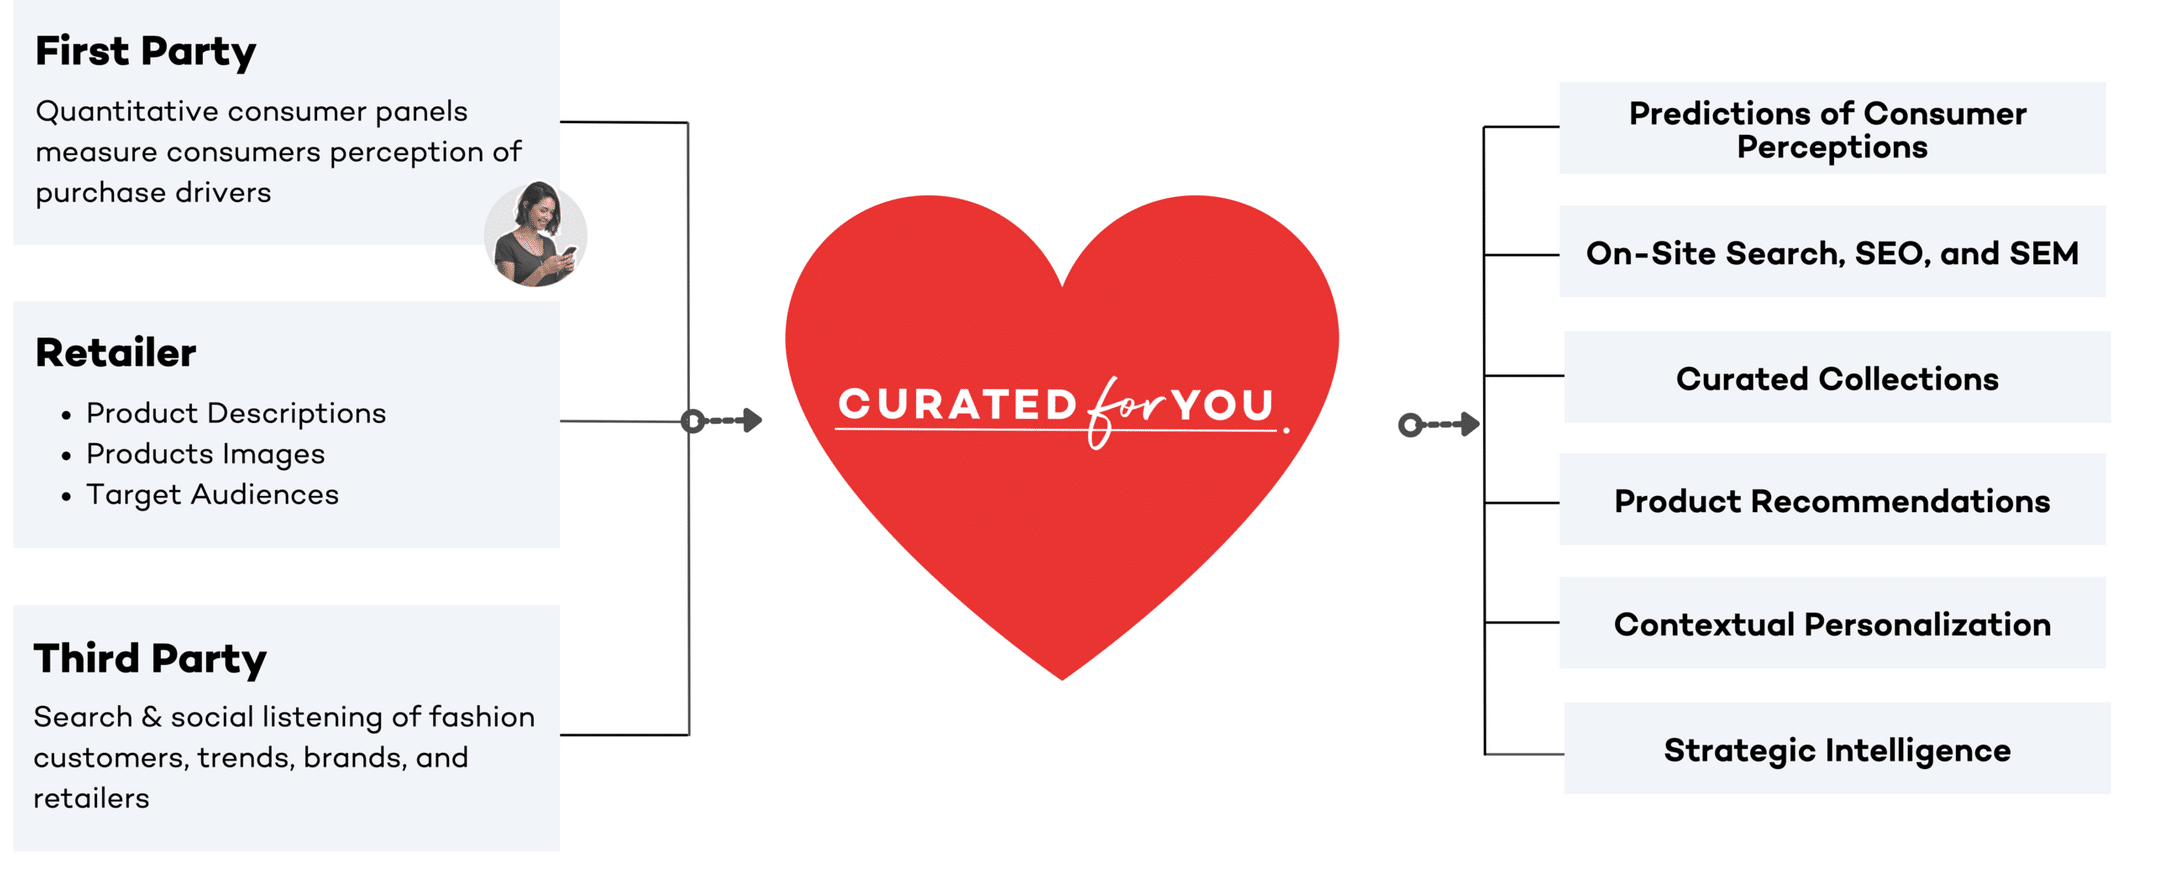 Curated for You